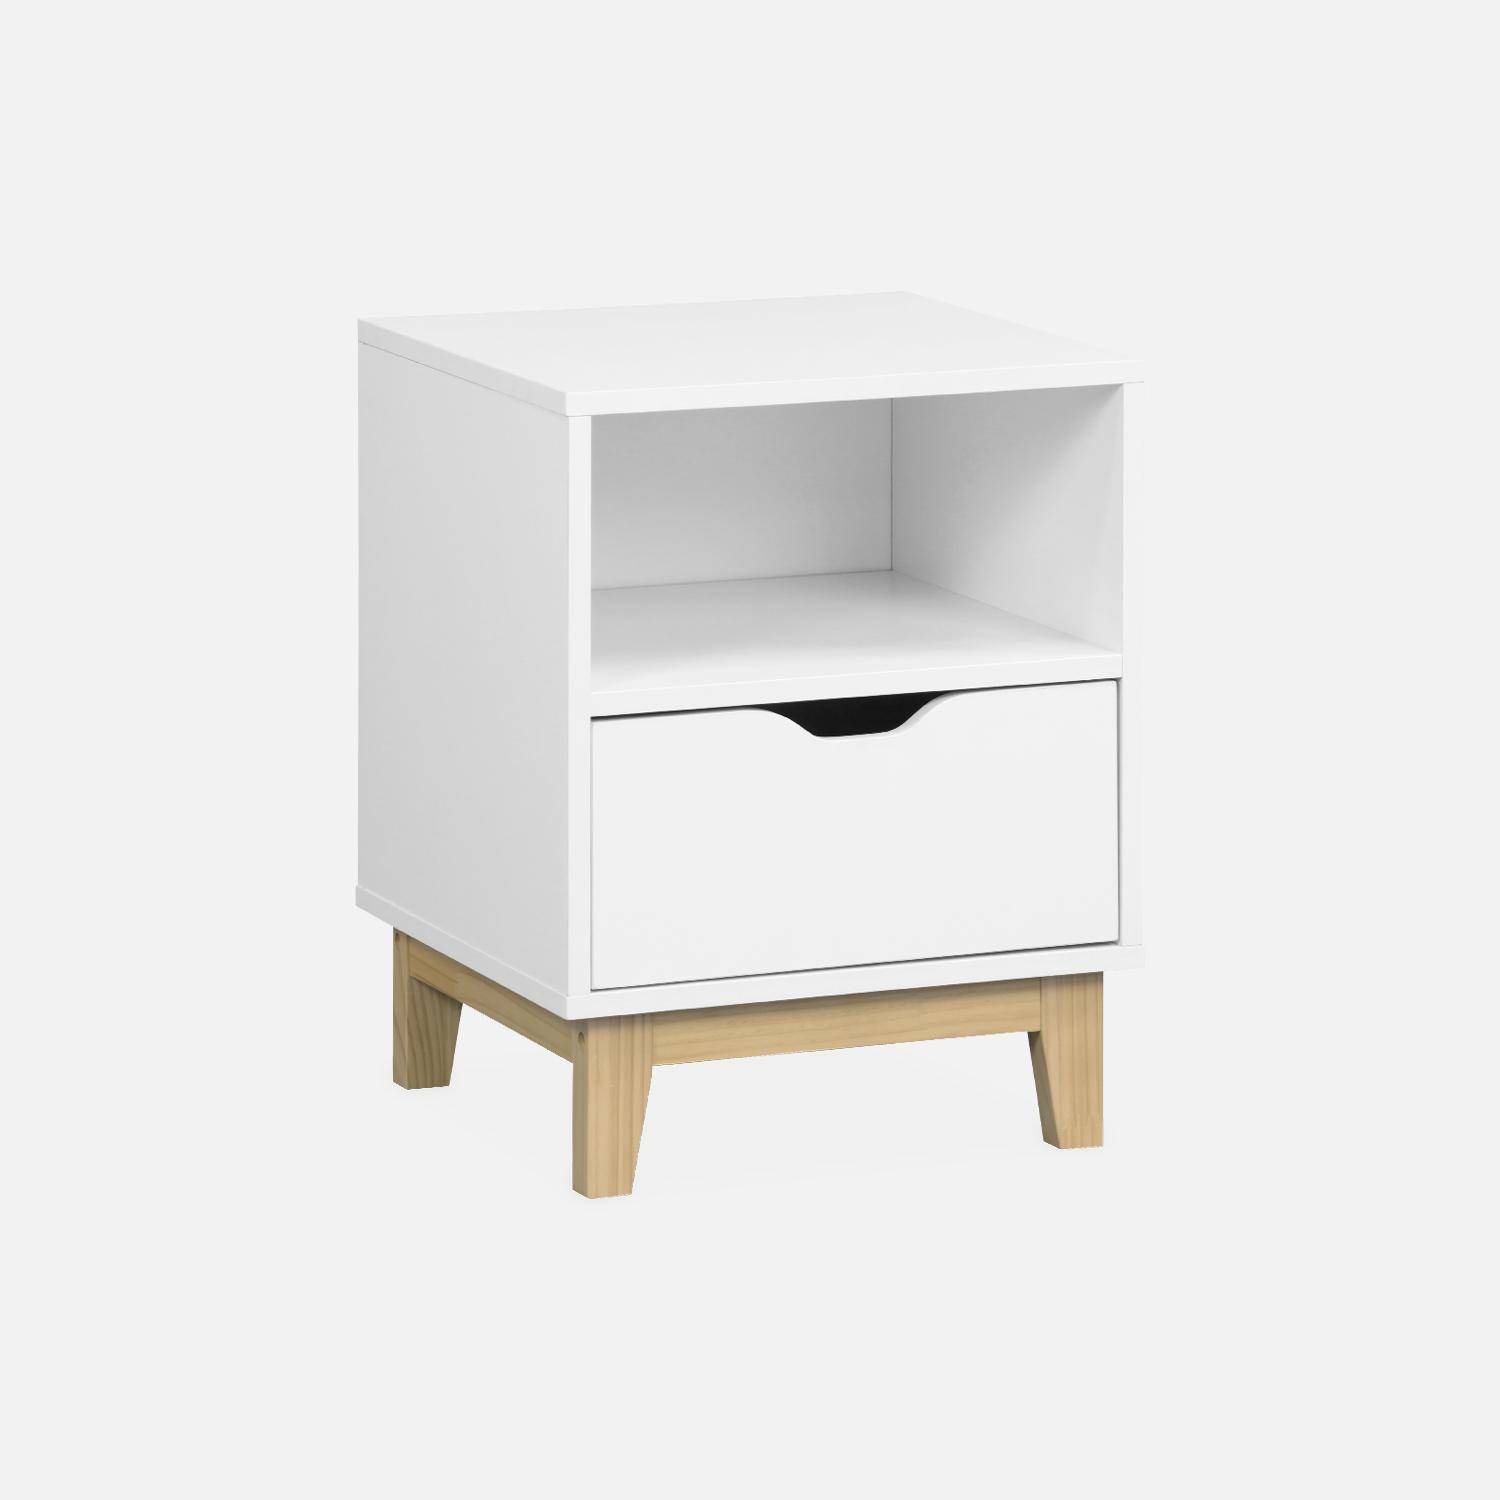 White bedside table with fir wood legs - Floki - 40 x 39 x 52cm - 1 drawer and 1 niche,sweeek,Photo4